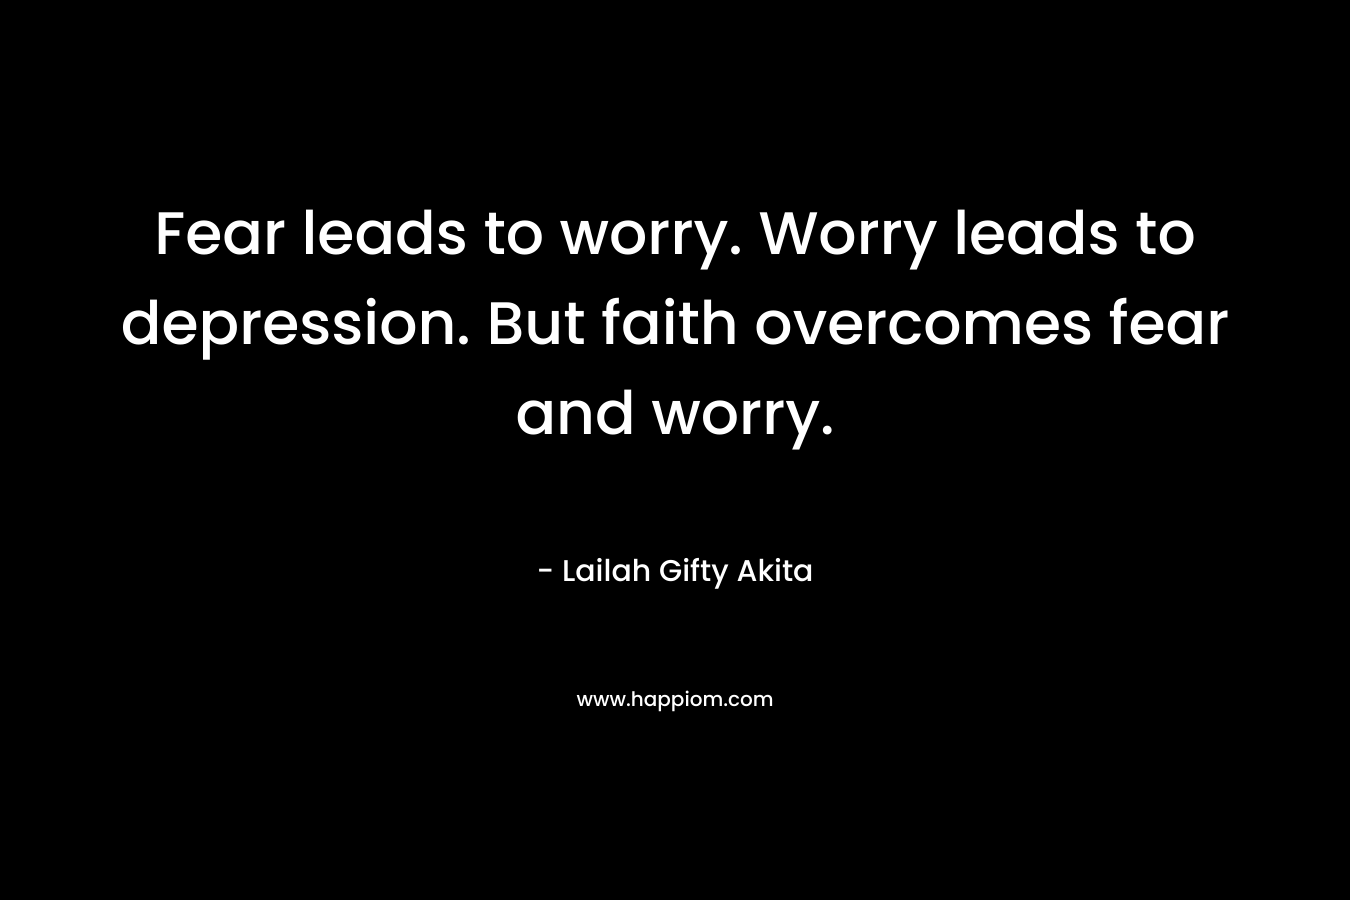 Fear leads to worry. Worry leads to depression. But faith overcomes fear and worry.